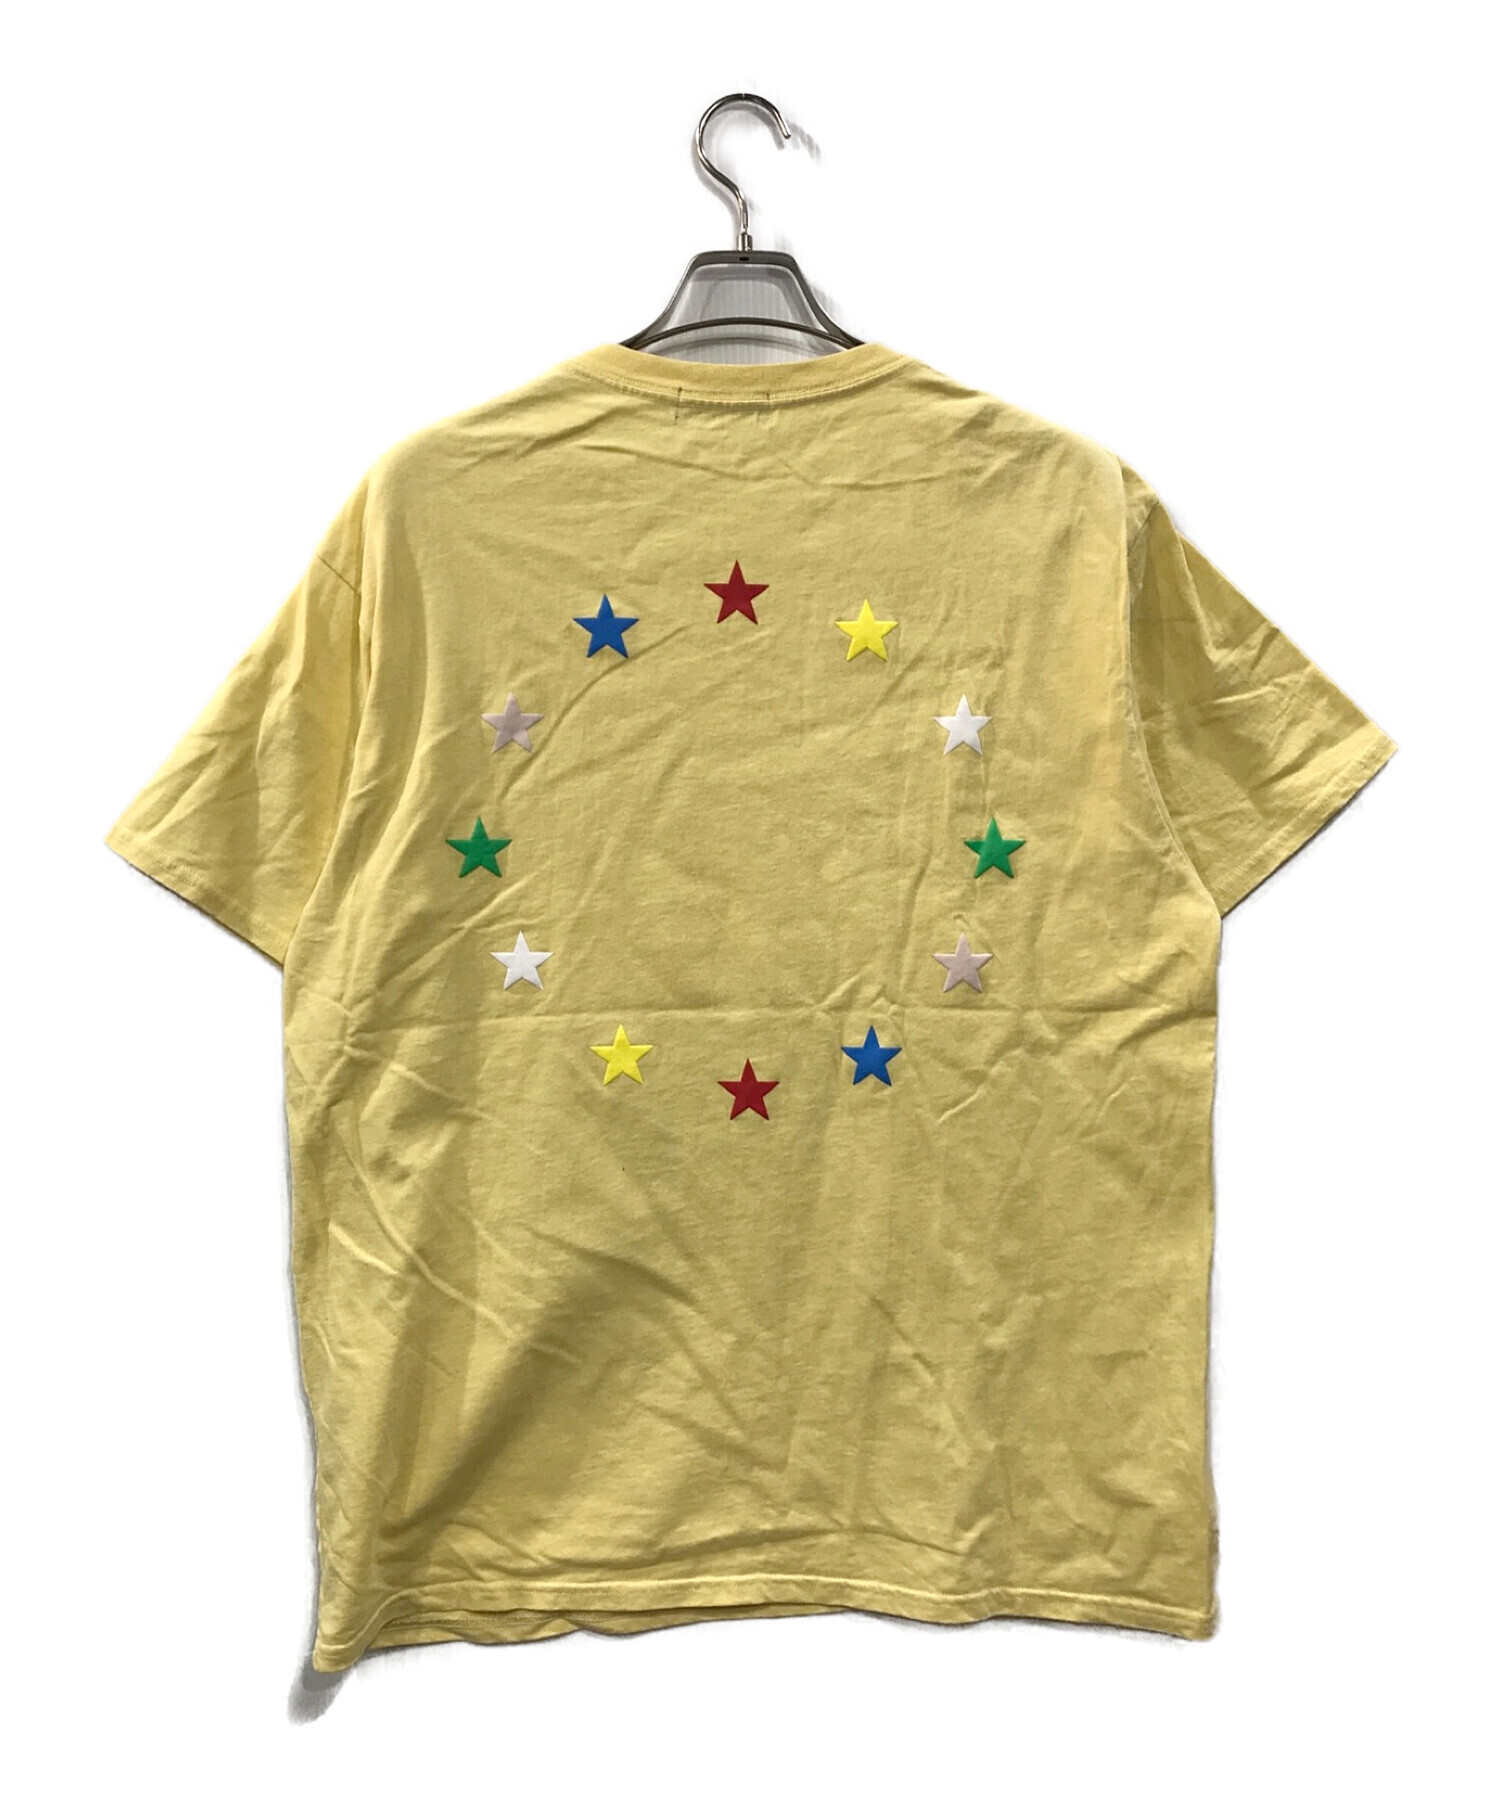 HUF X WDS SOLID AND TIE DYE TEE / YELLOW